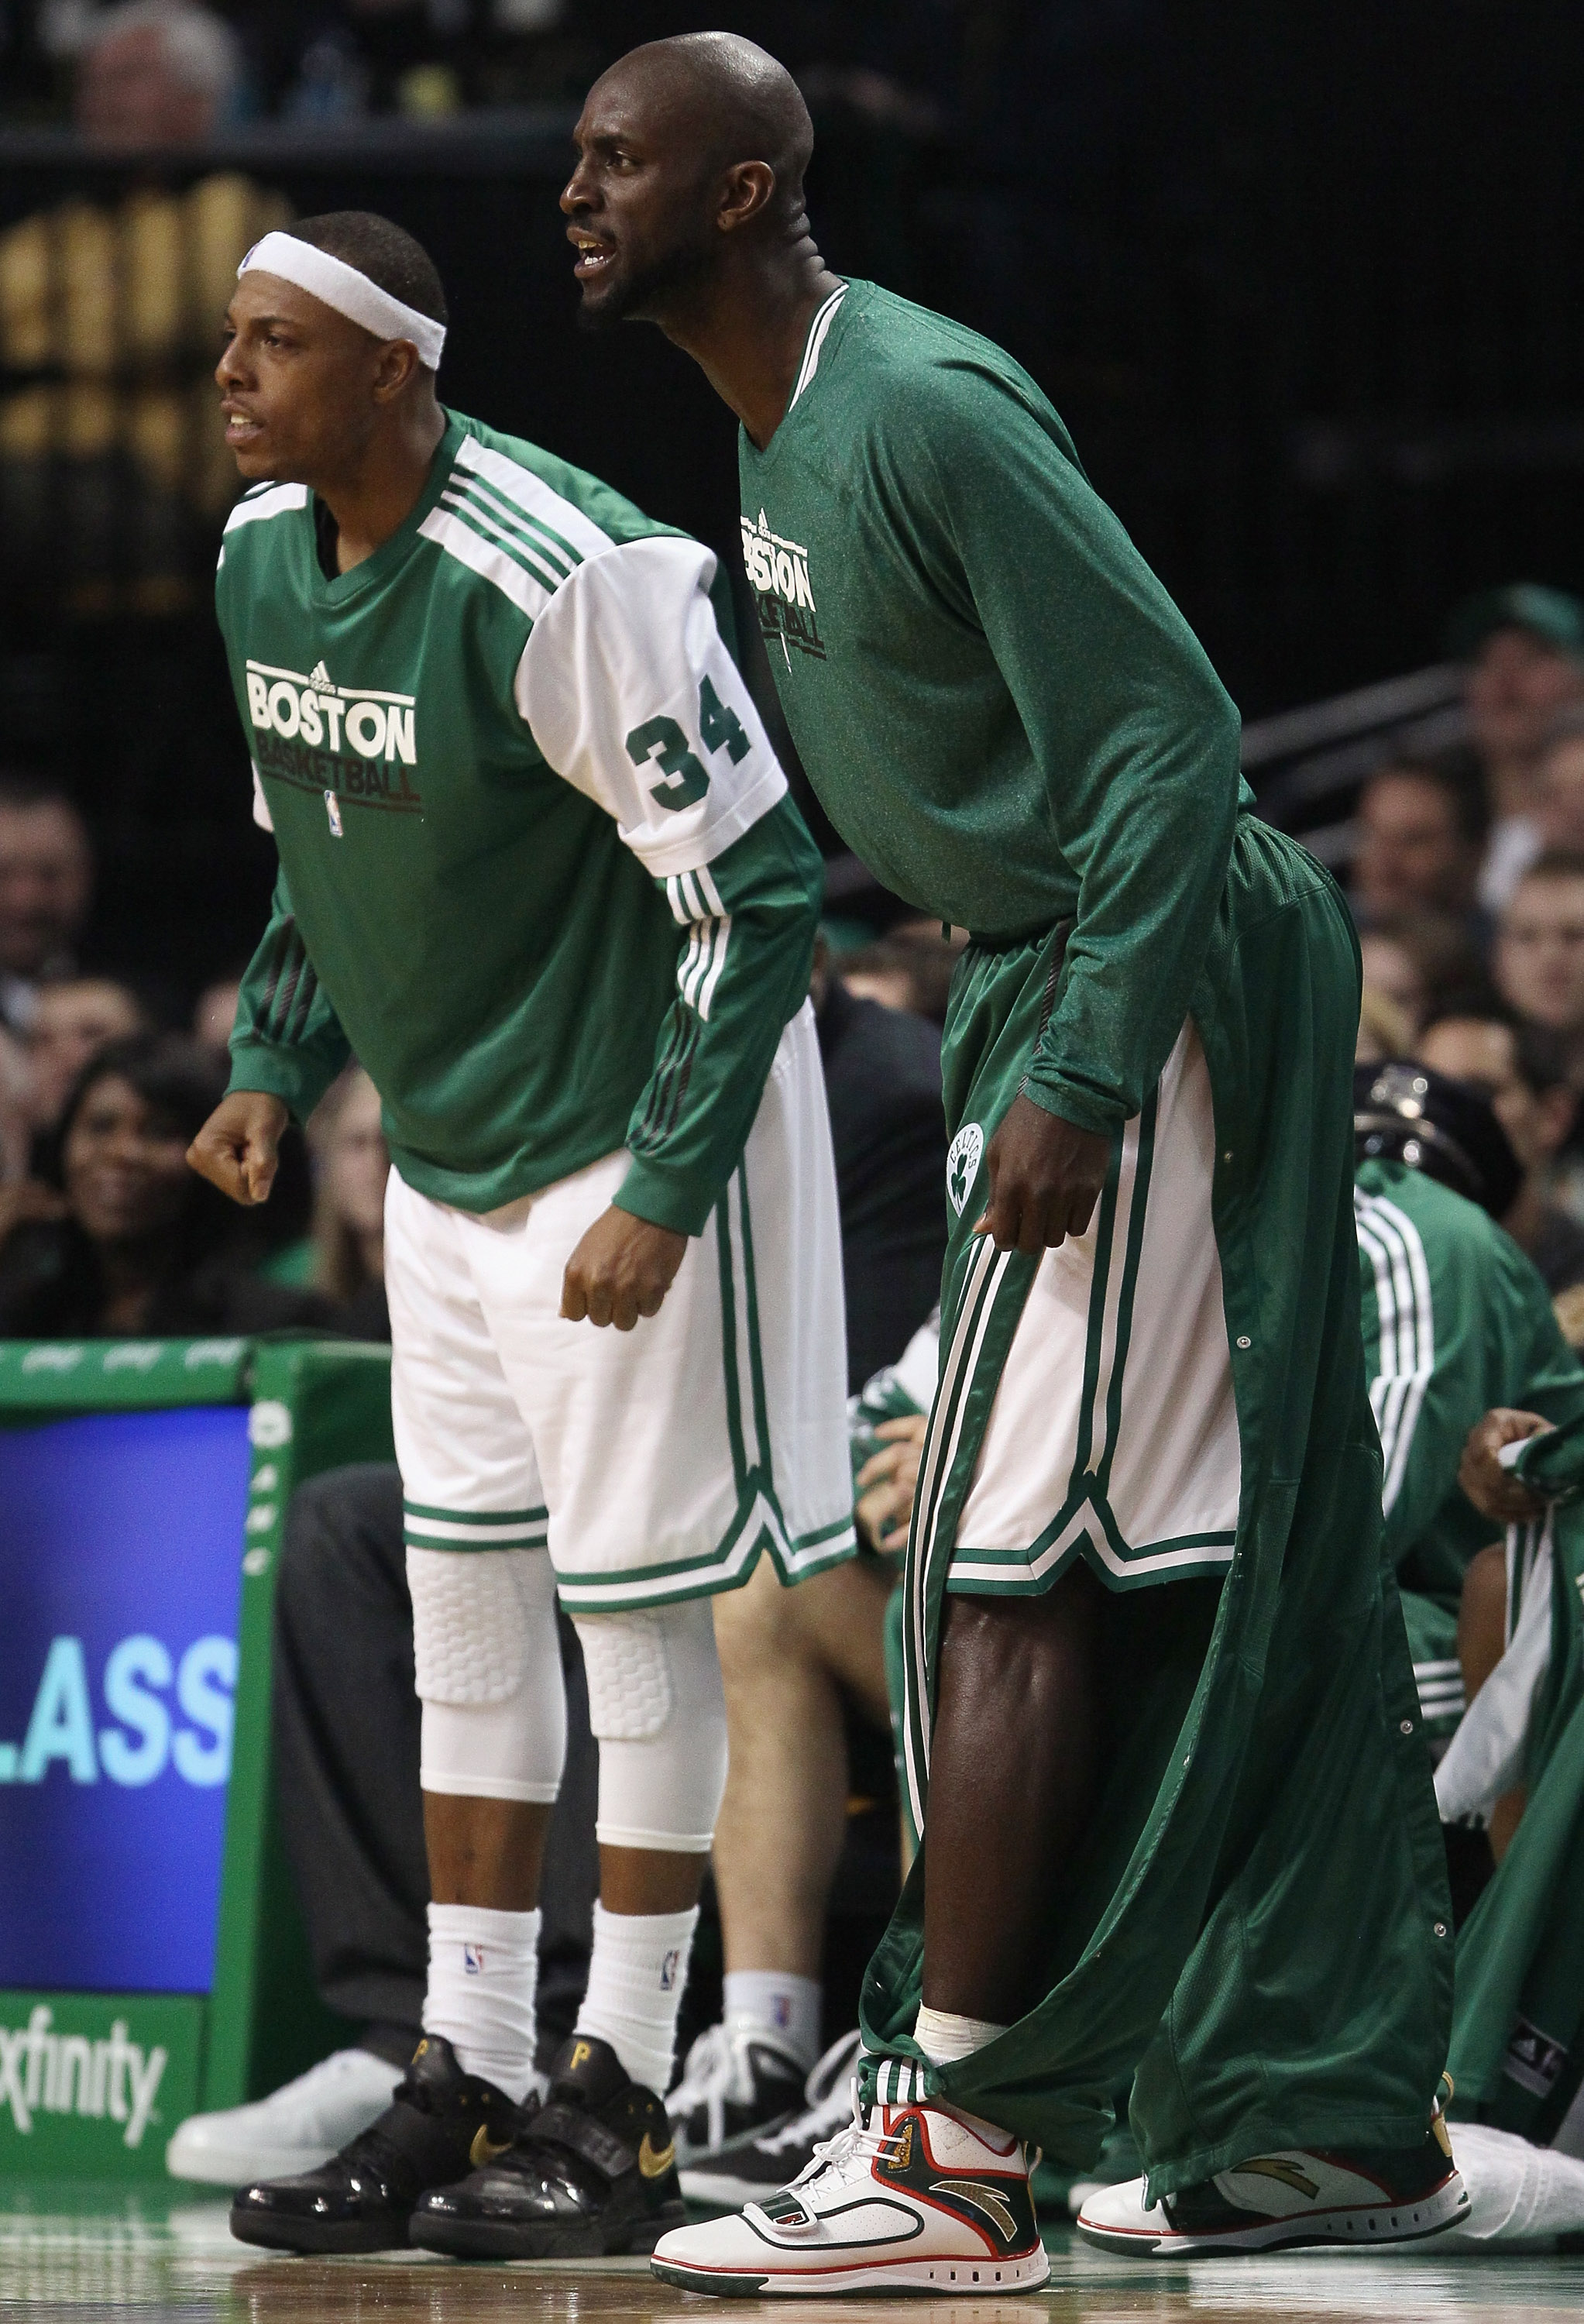 BOSTON, MA - JANUARY 25:  Paul Pierce #34 and Kevin Garnett #5 of the Boston Celitcs cheer on their teammates in the second half against the Cleveland Cavaliers on January 25, 2011 at the TD Garden in Boston, Massachusetts. The Celtics defeated the Cavali